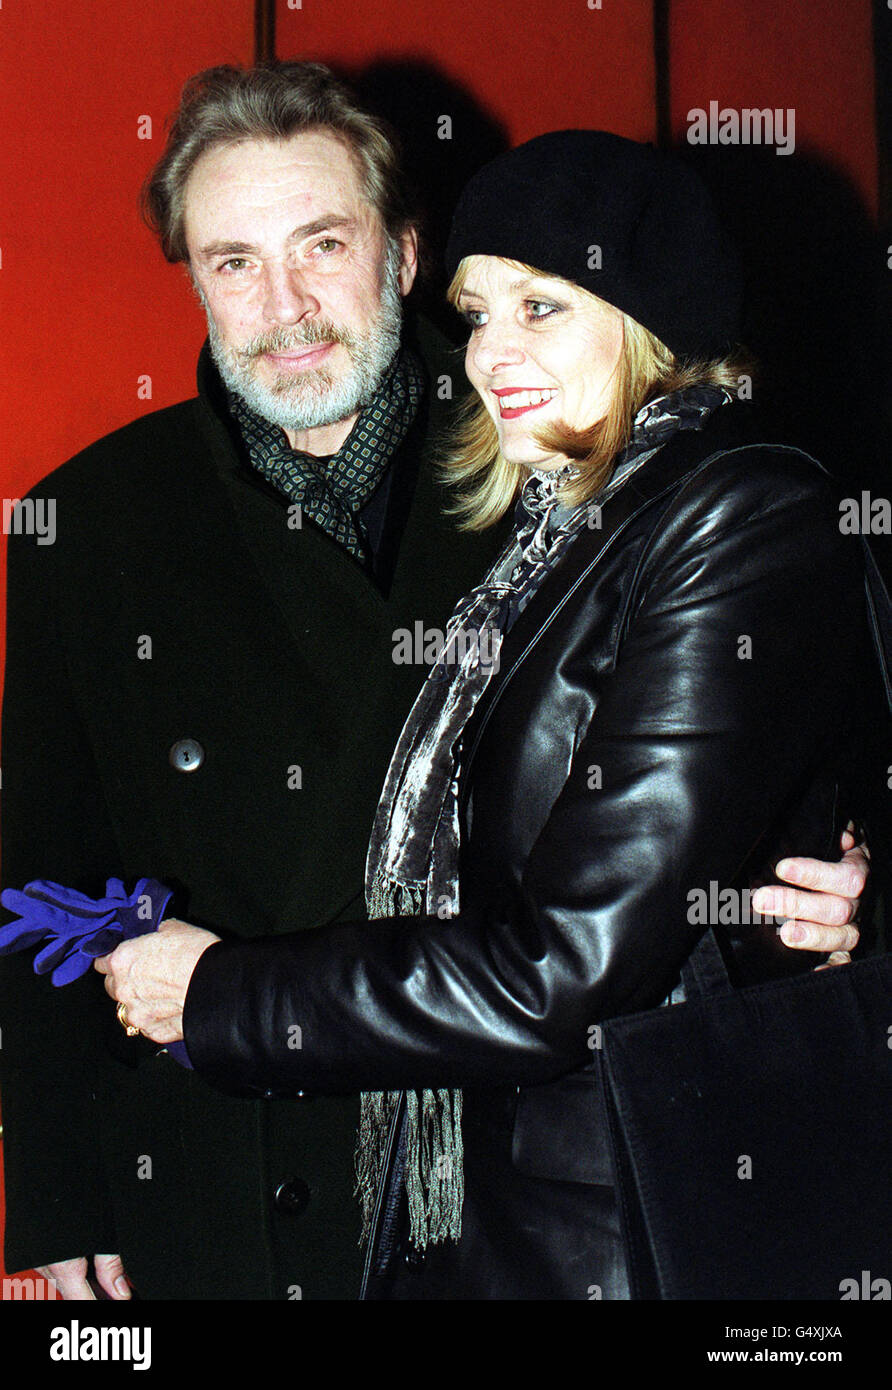 Twiggy and her husband Leigh Lawson, arrive for the celebrity film premiere of Neil Jordan's 'The End of the Affair' at the Curzon Cinema in London. Stock Photo